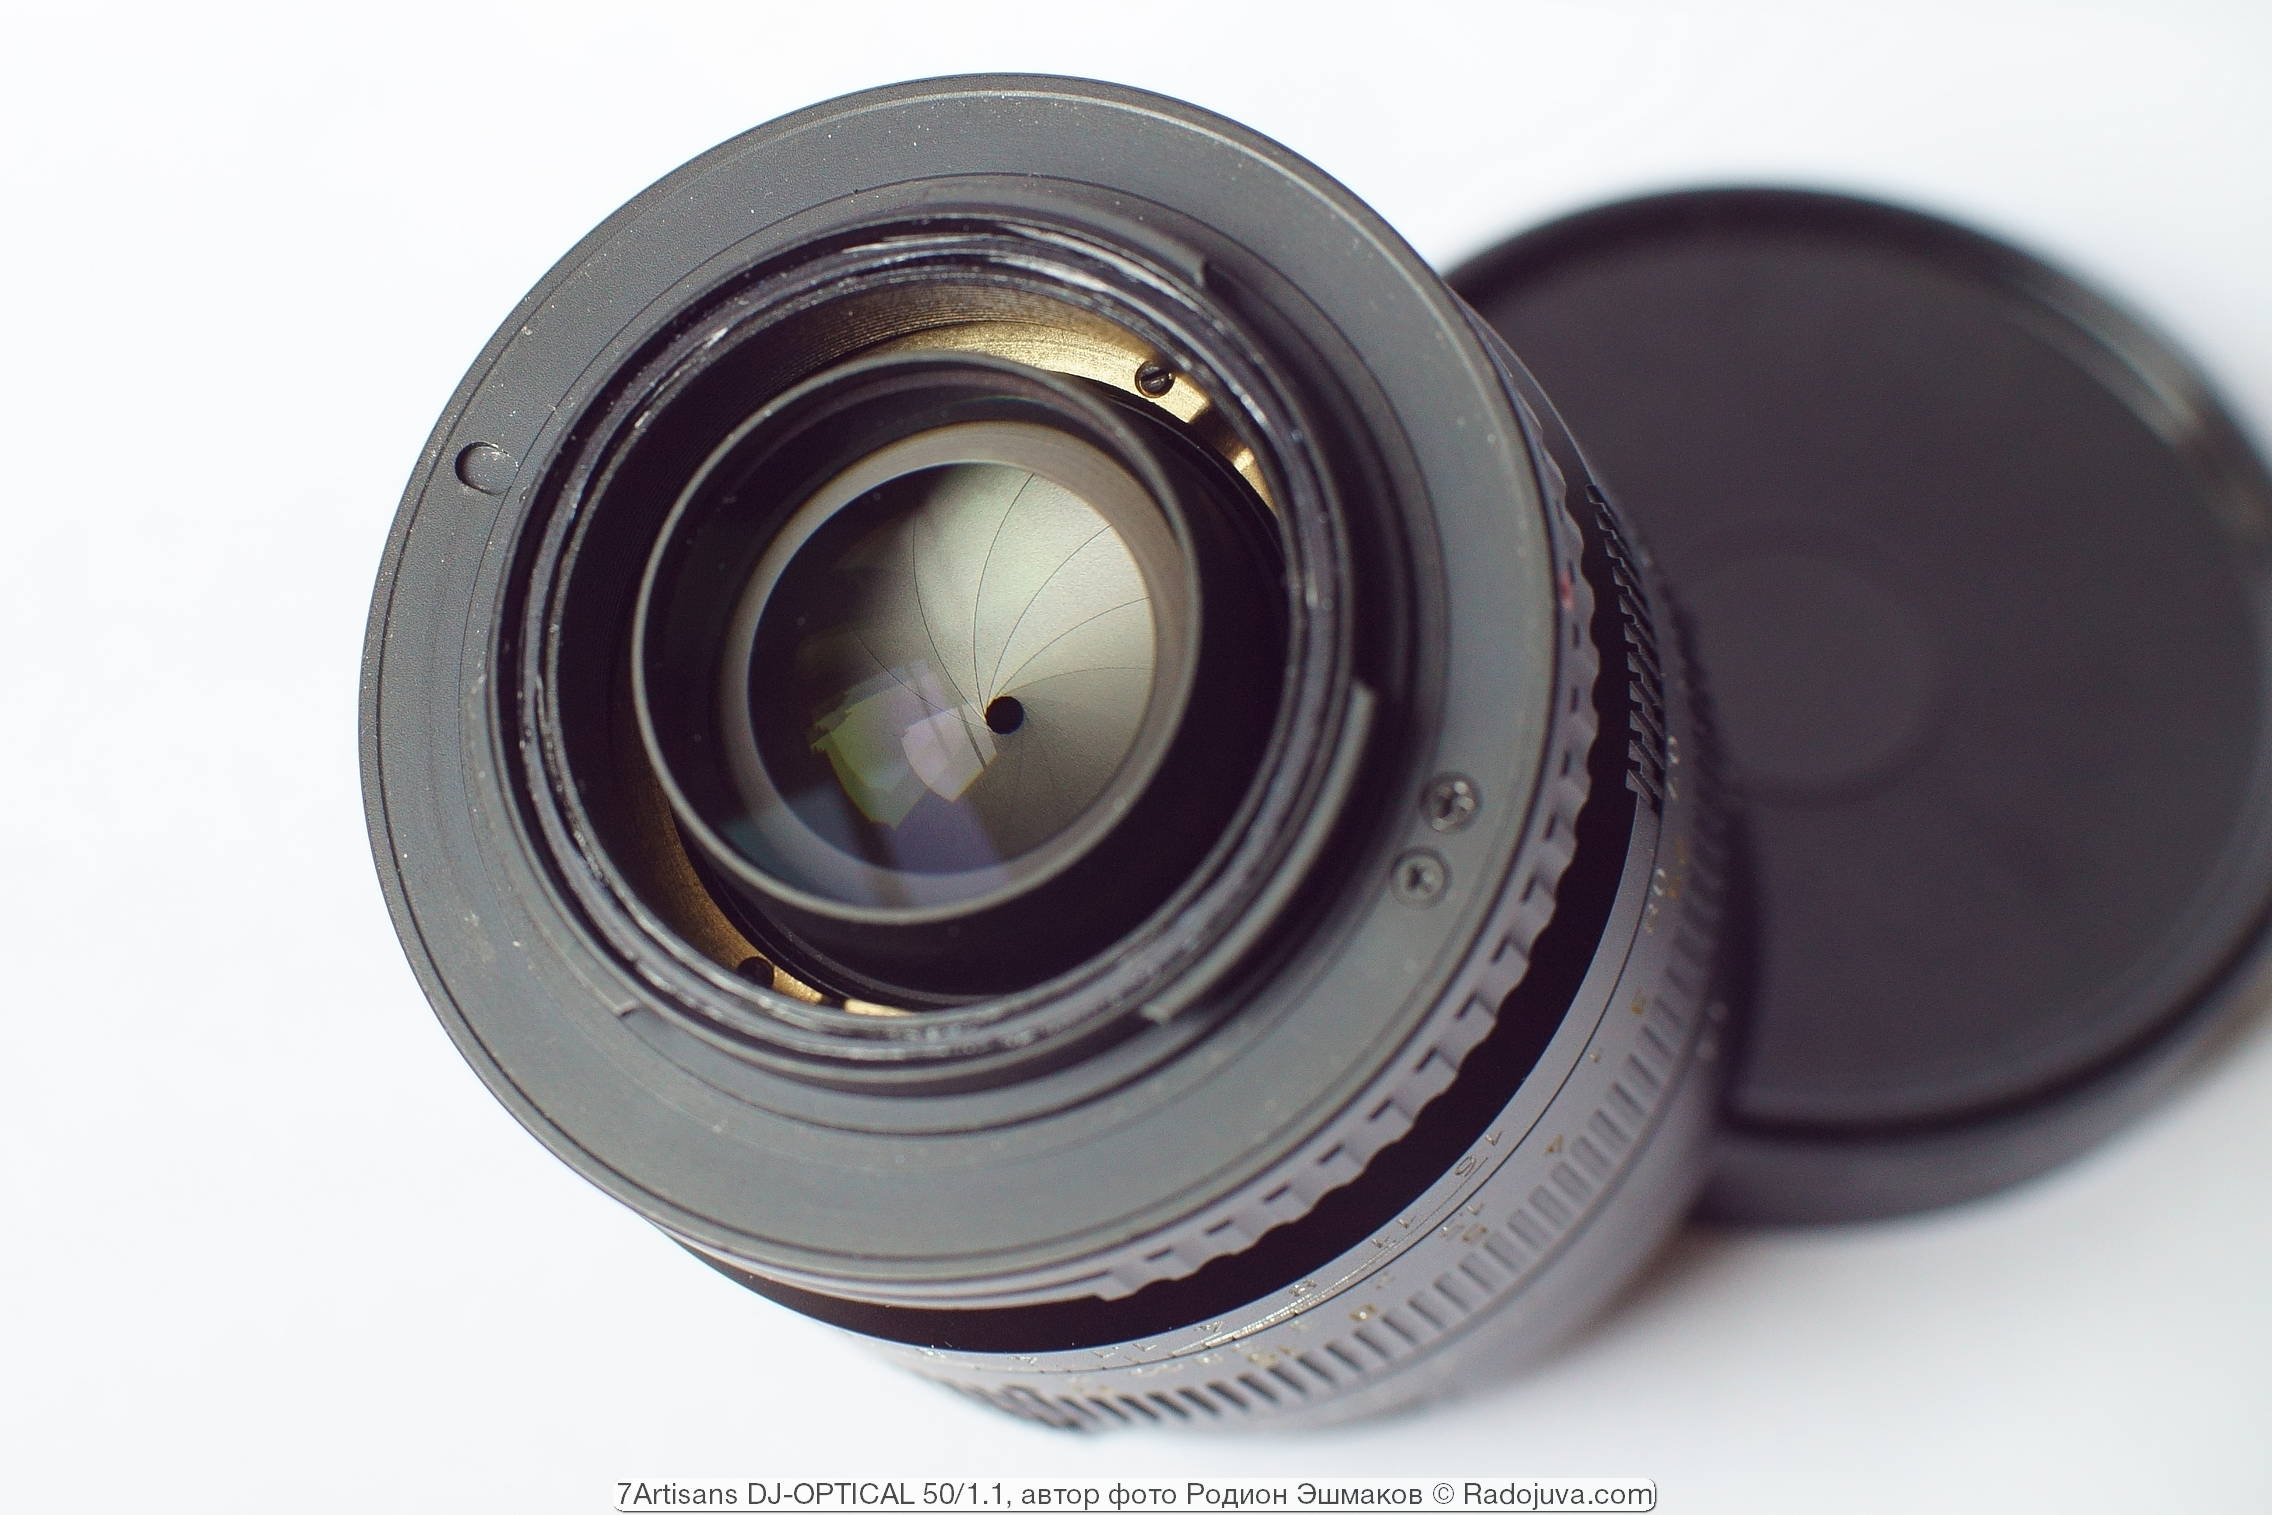 Rear lens view of the lens.